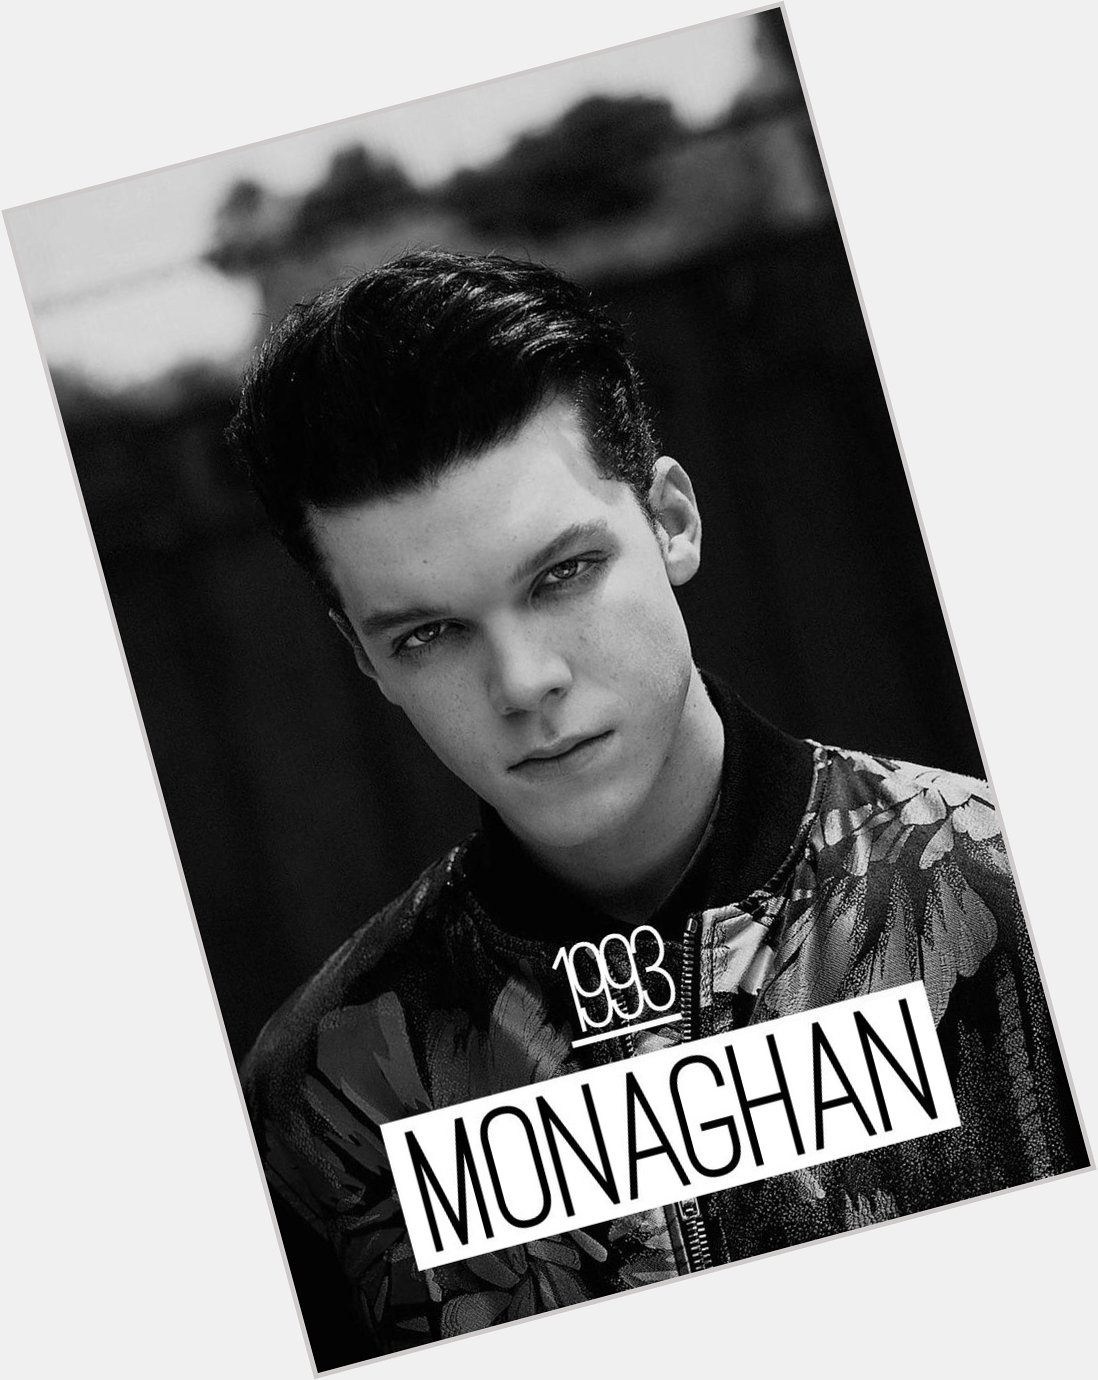 And also, happy birthday to Cameron Monaghan of  -----
[ 